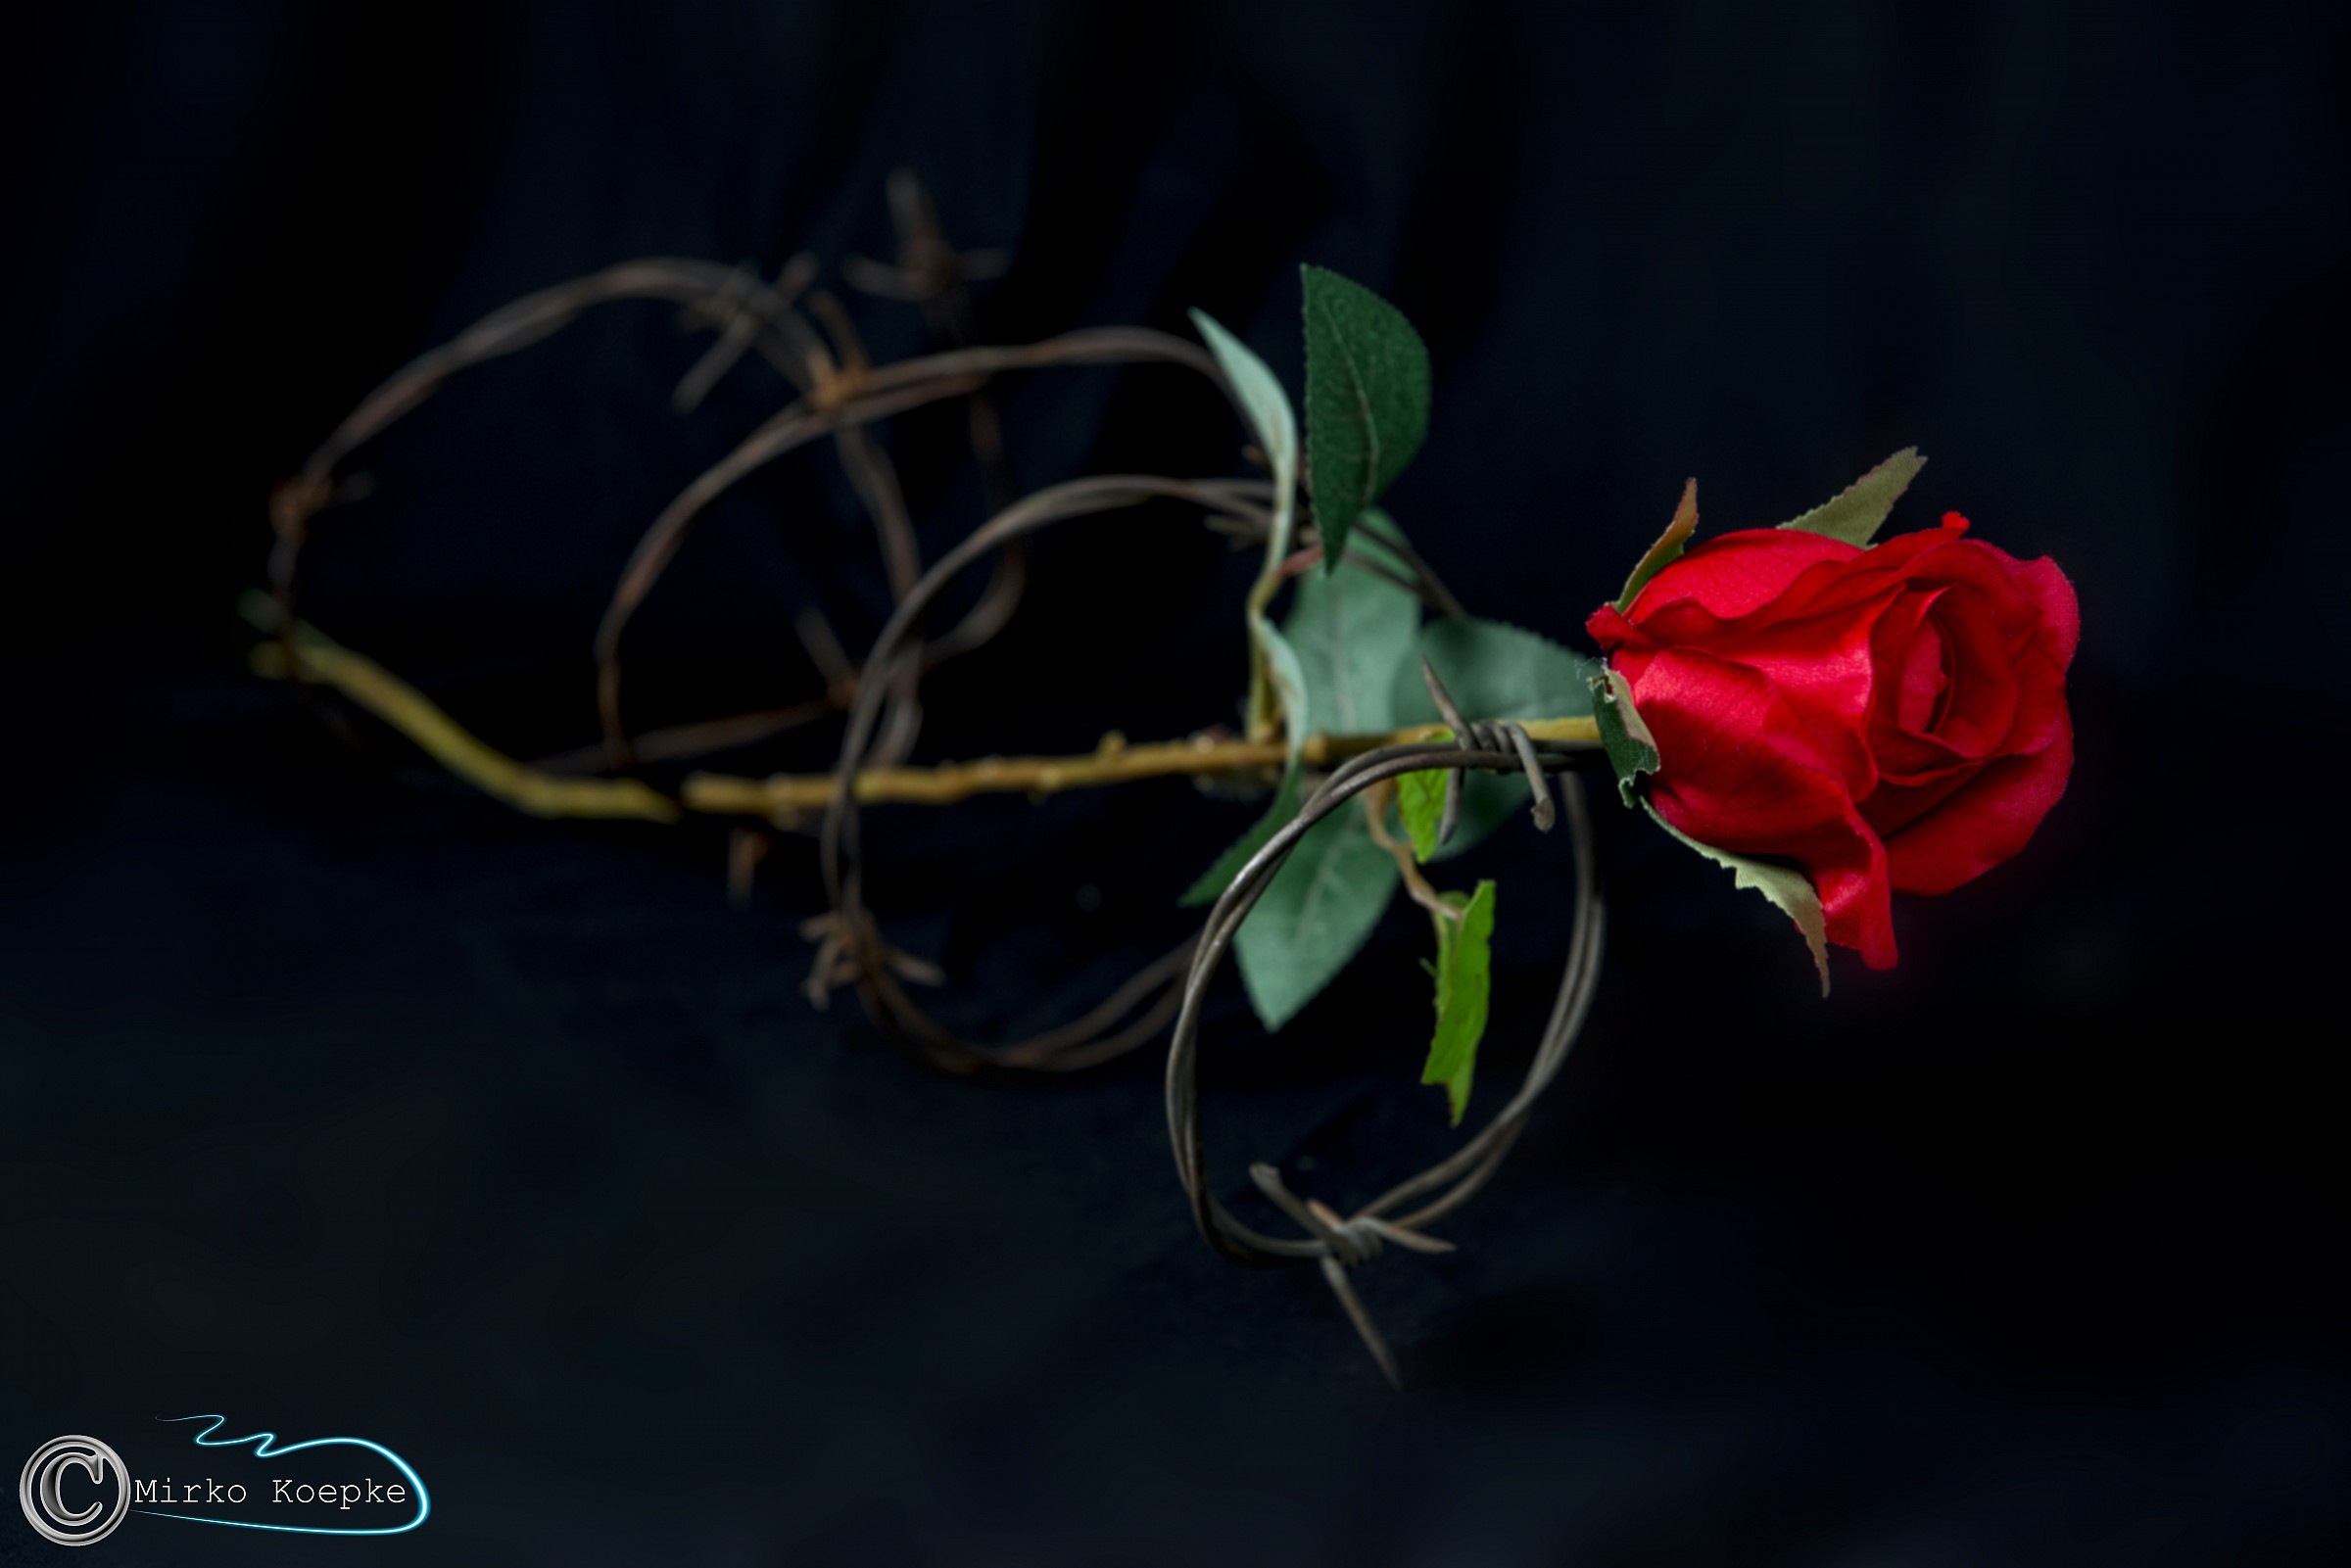 The rose is true that with the thorns ......